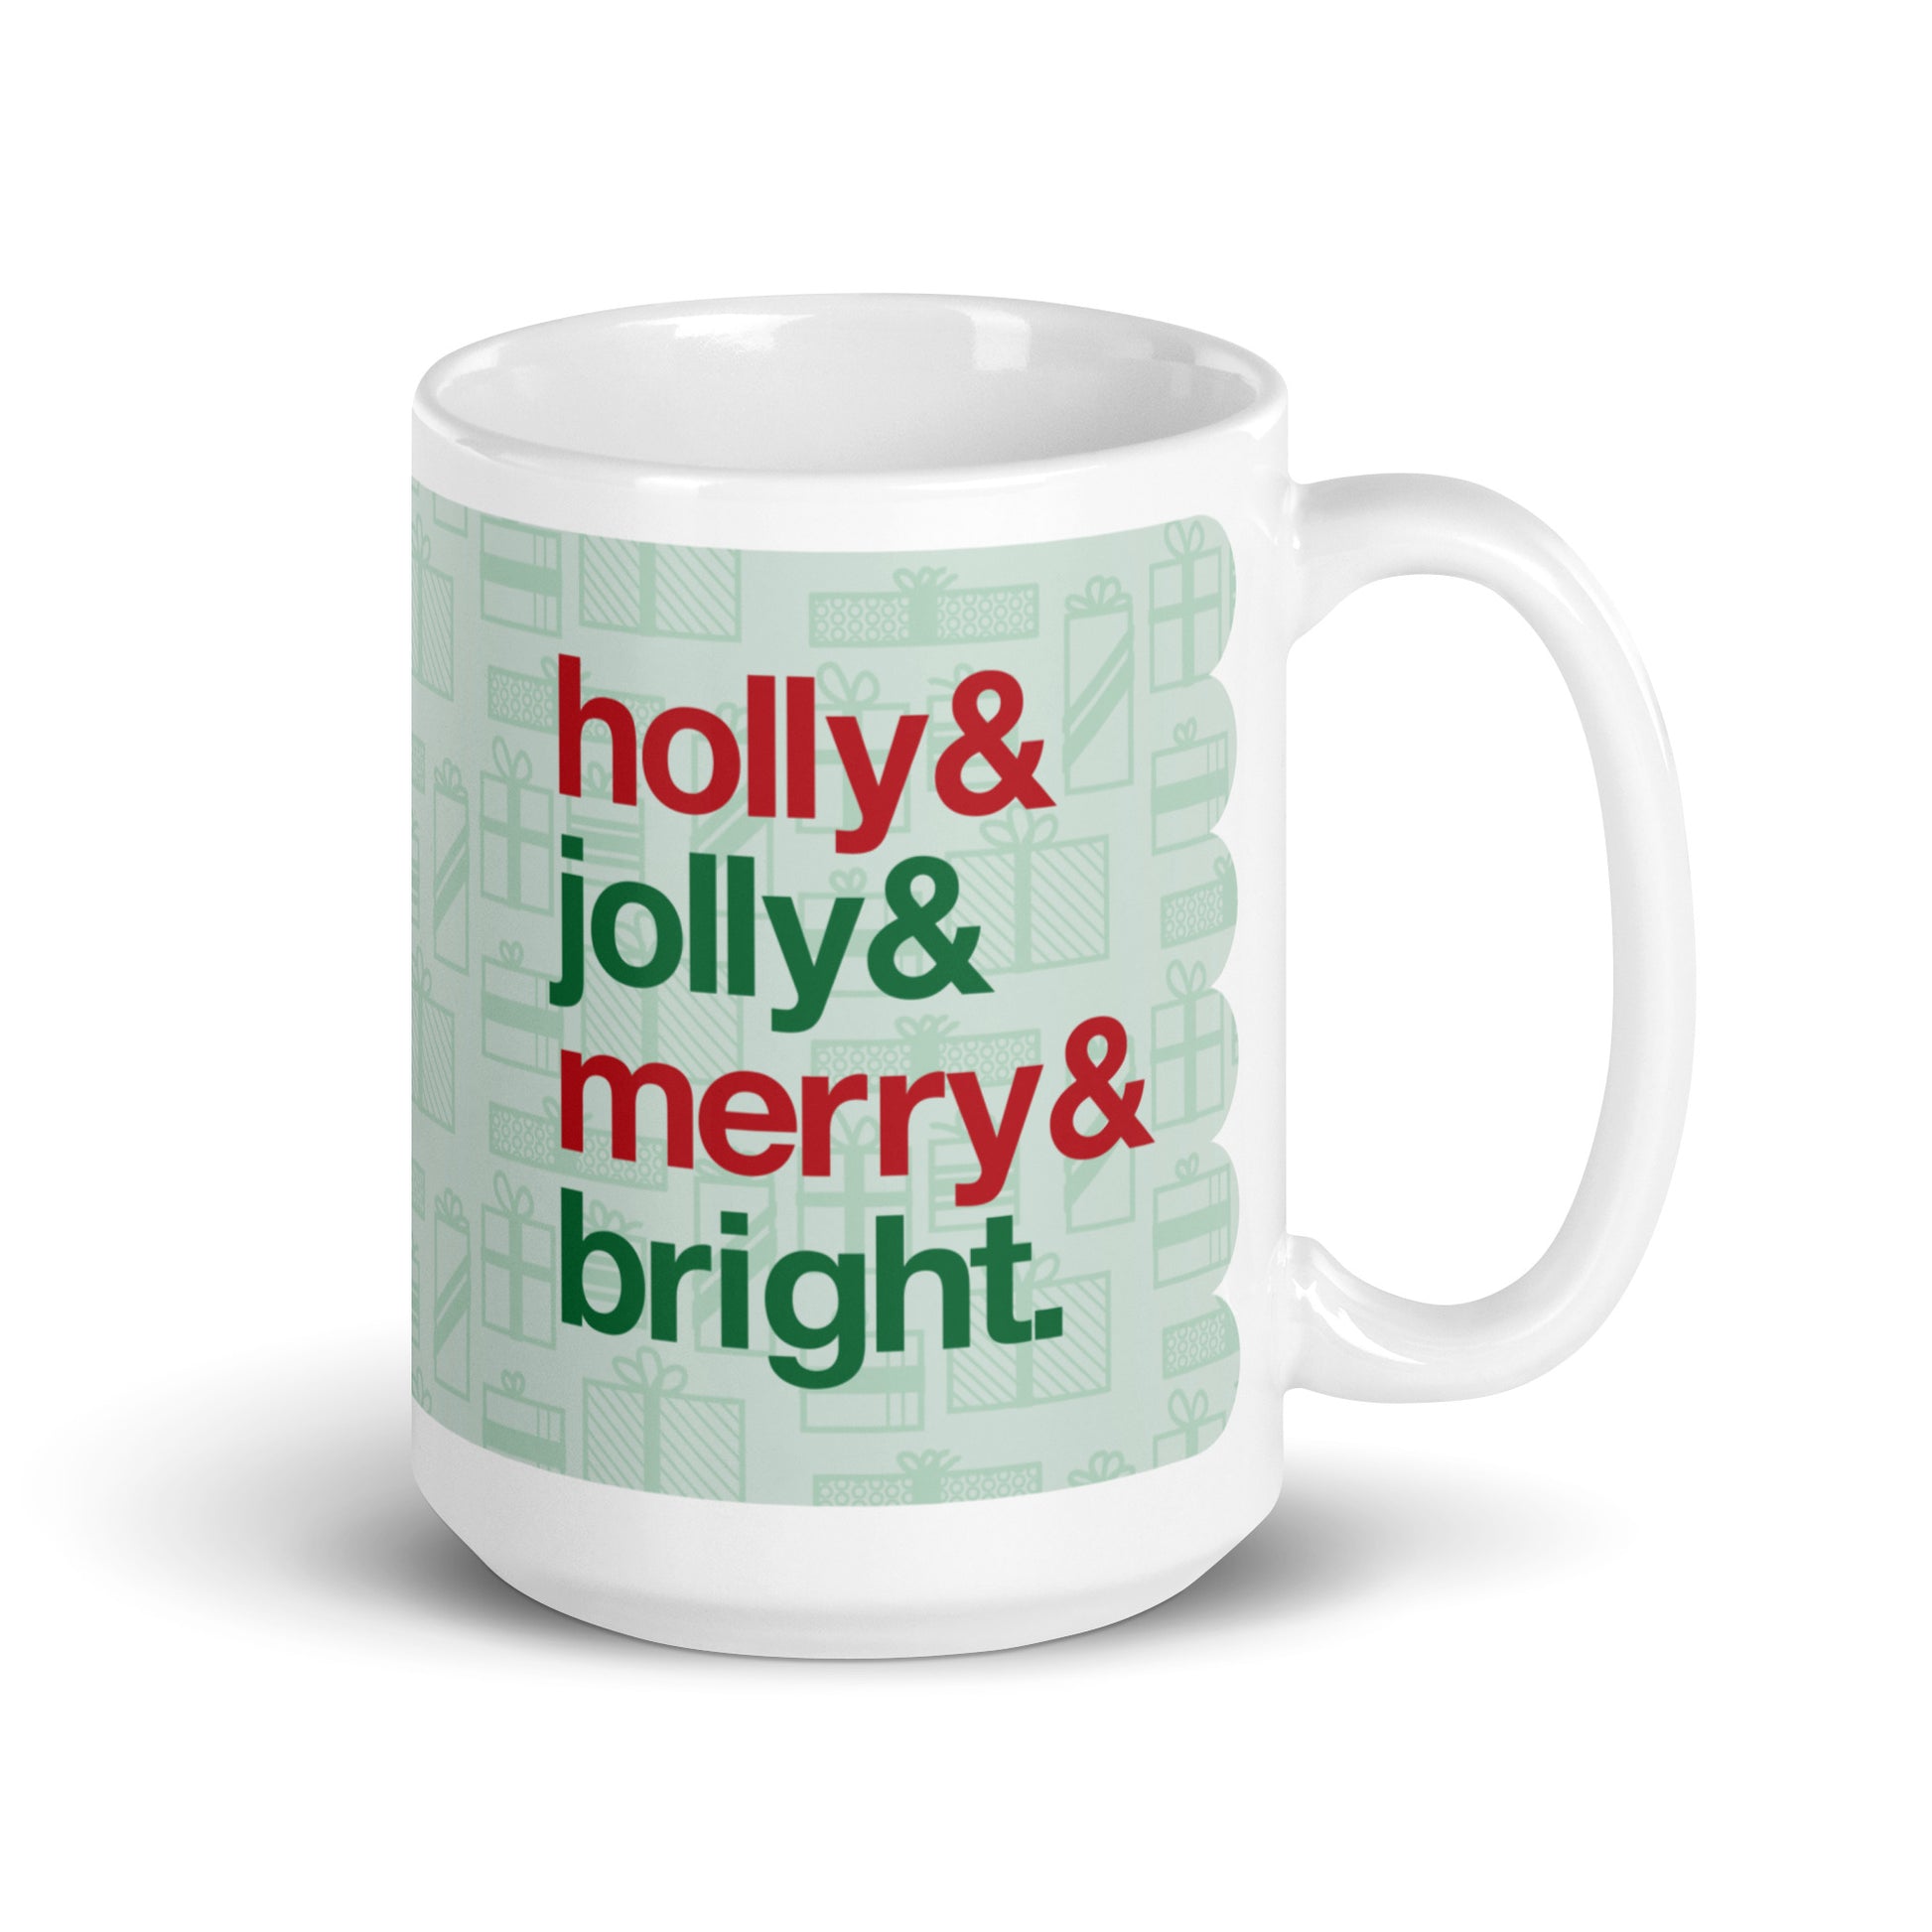 A 15ounce ceramic mug with four lines of red and green text on a background pattern of light green presents of various sizes. The text on the mug reads "Holly & Jolly & Merry & Bright".